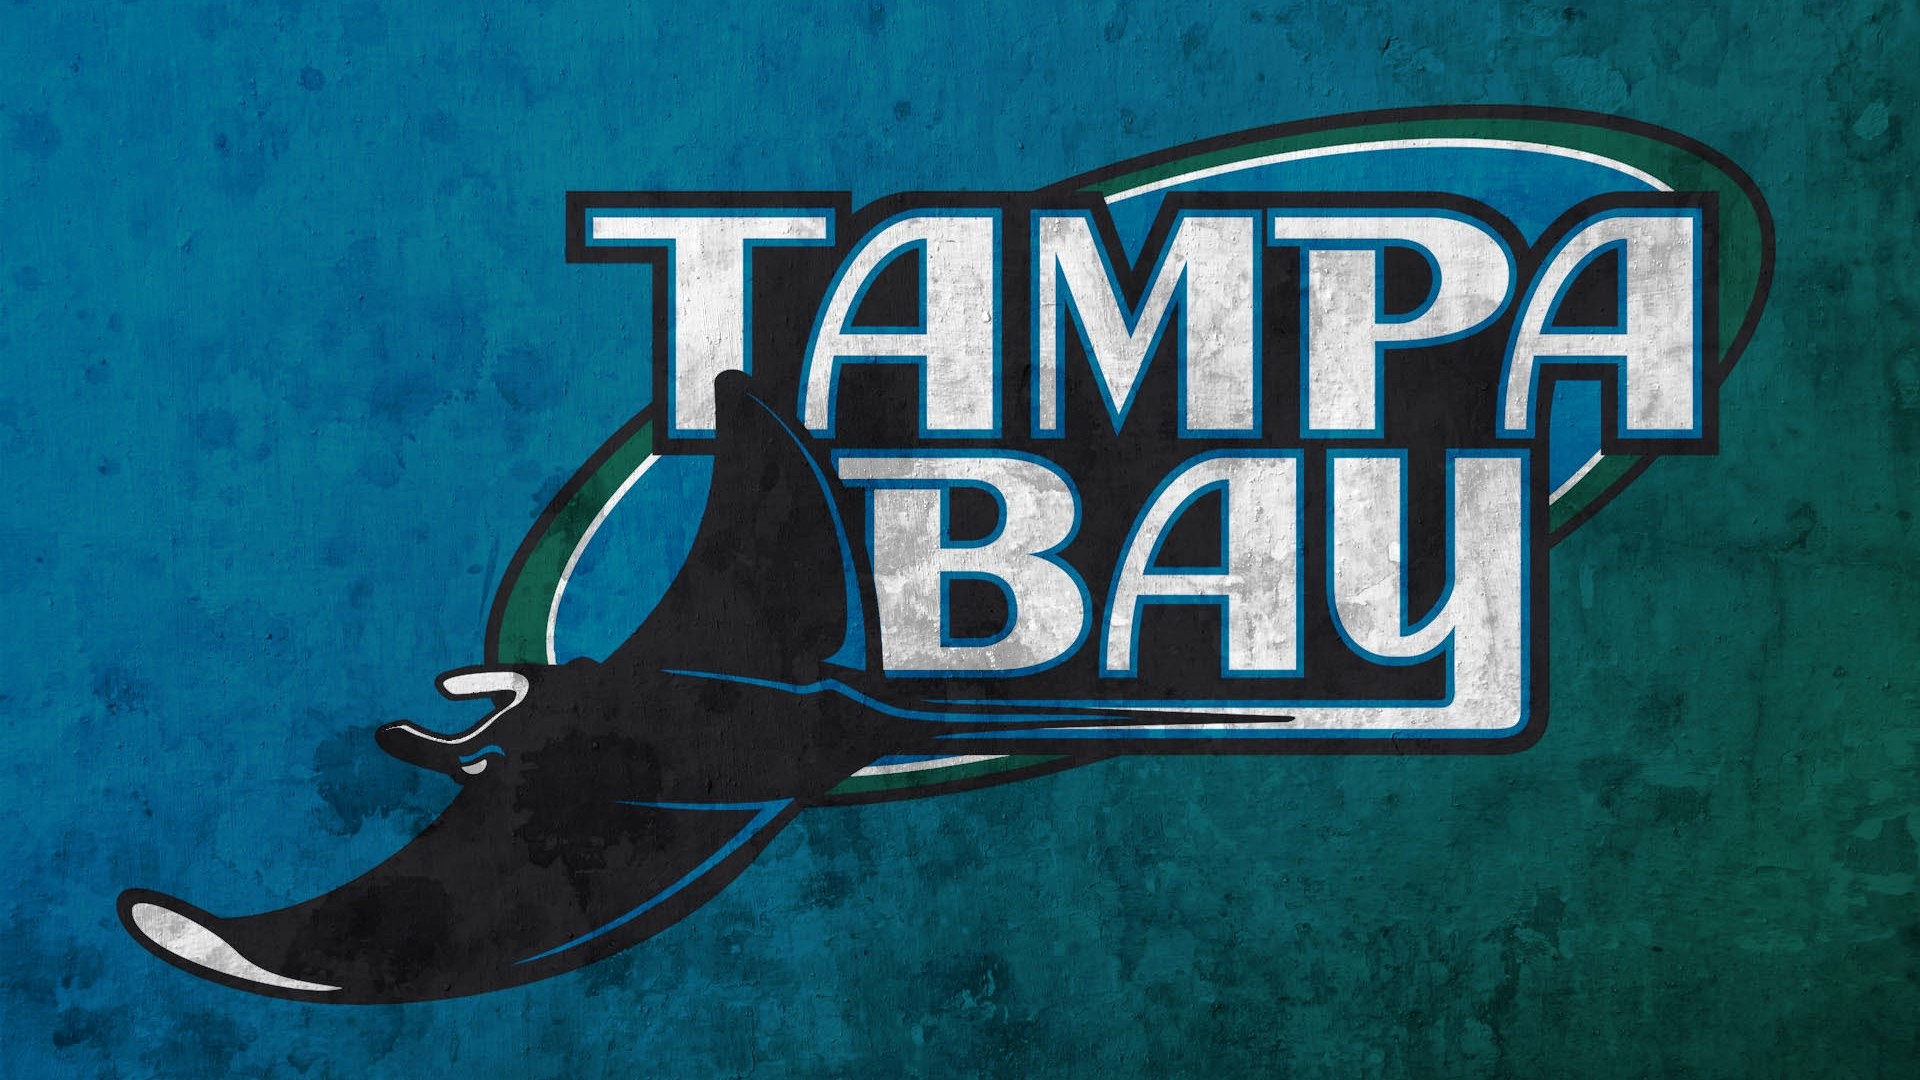 Wallpaper Desktop Tampa Bay Rays HD with high-resolution 1920x1080 pixel. You can use this wallpaper for Mac Desktop Wallpaper, Laptop Screensavers, Android Wallpapers, Tablet or iPhone Home Screen and another mobile phone device